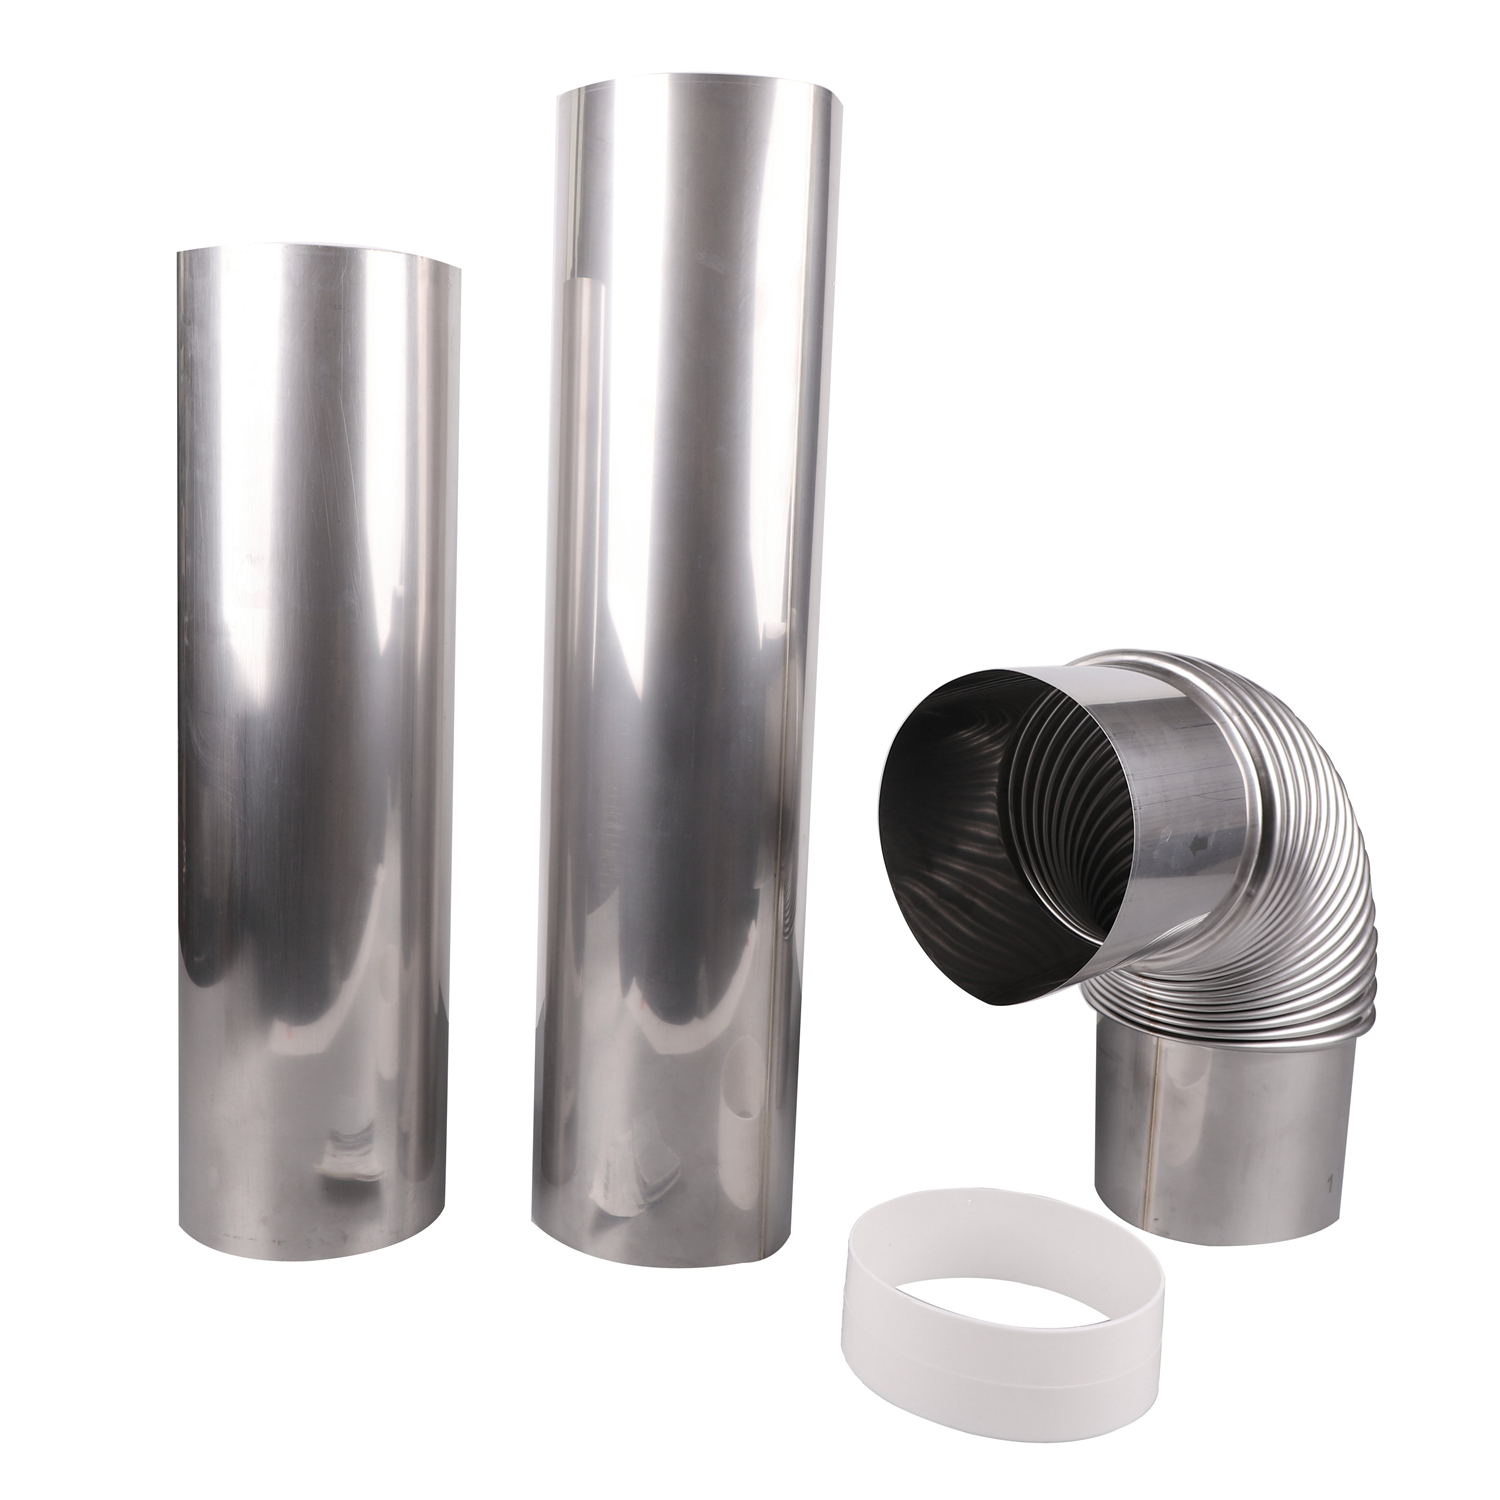 Stainless steel composite smoke pipe set